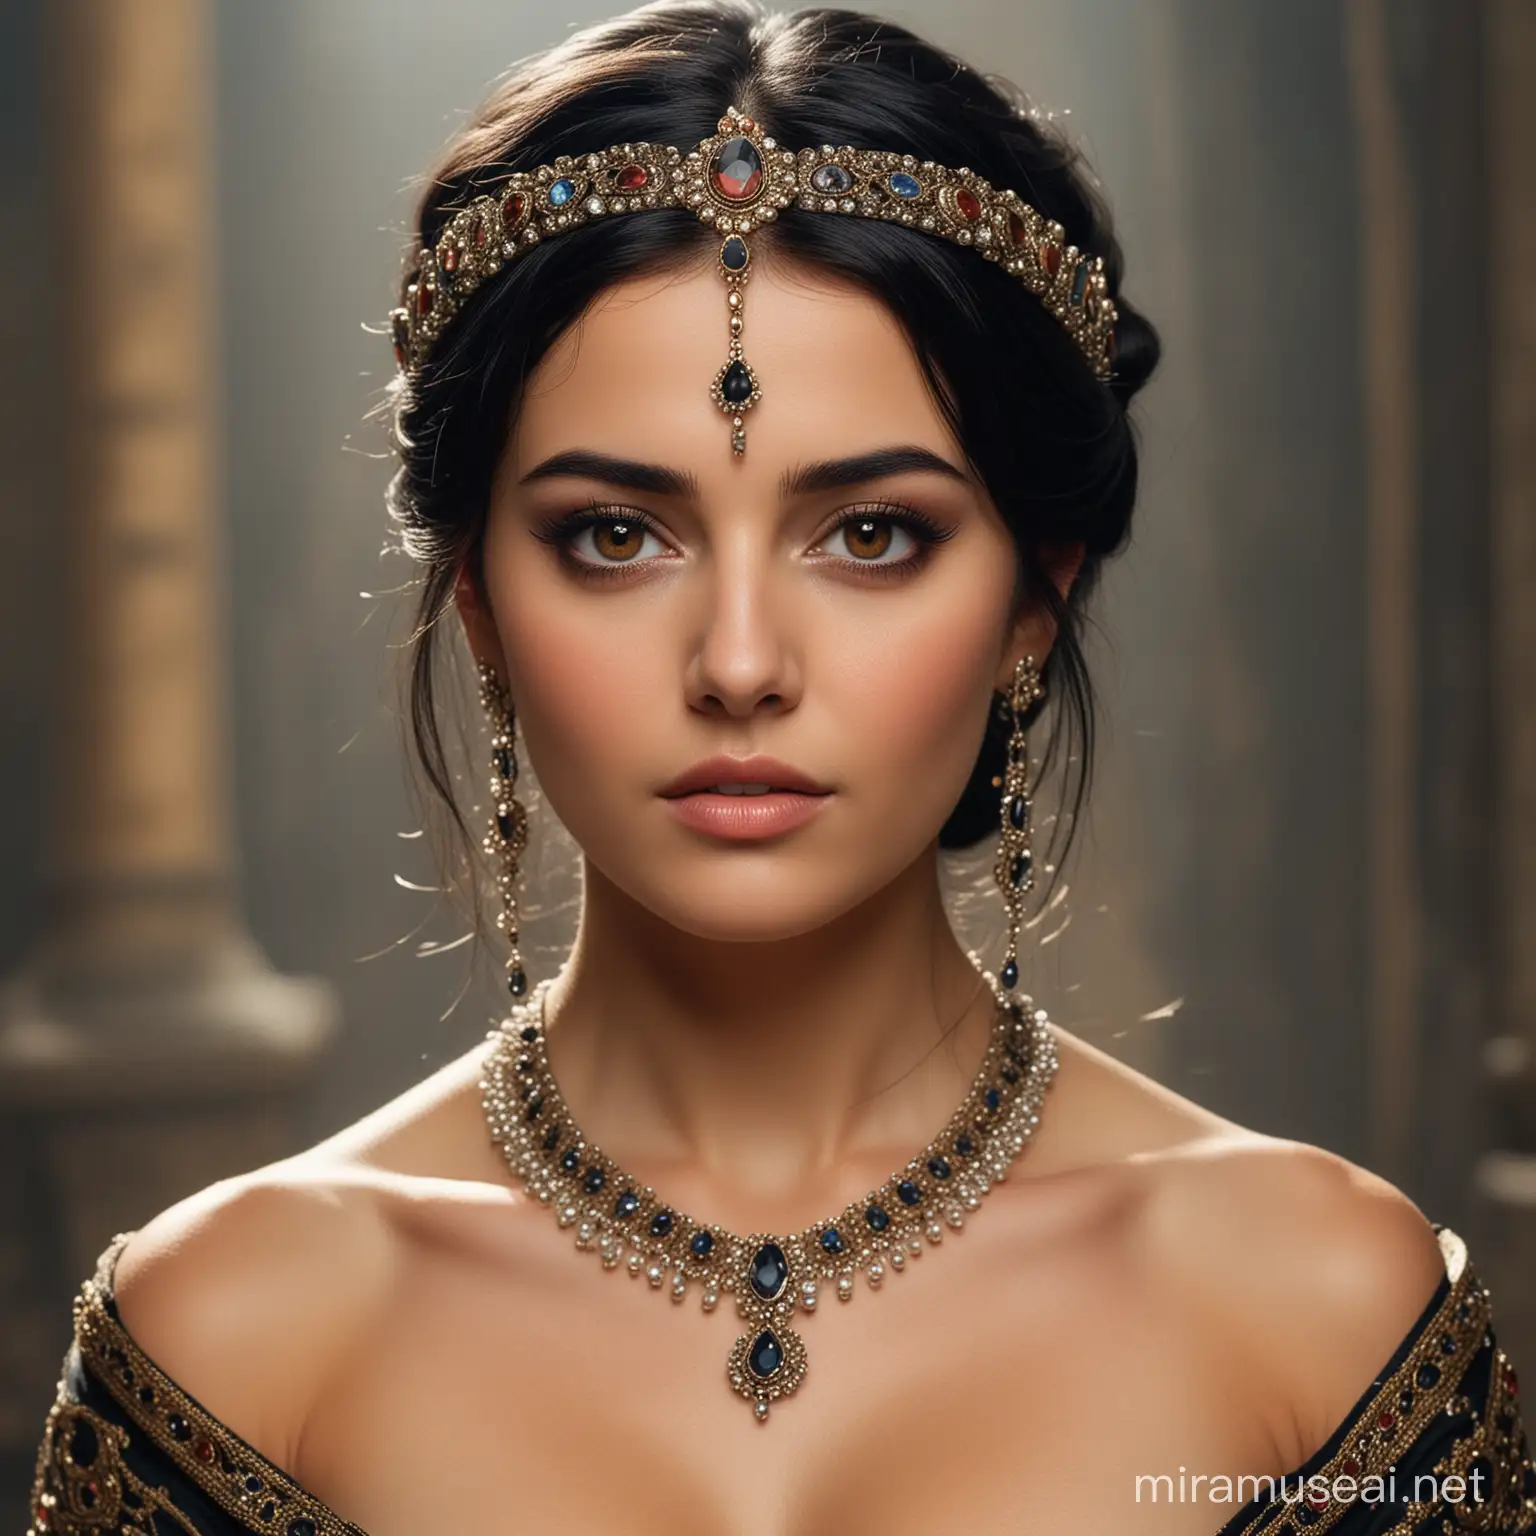 12th Century Beautiful Woman with Black Hair and Brown Eyes in Jewels